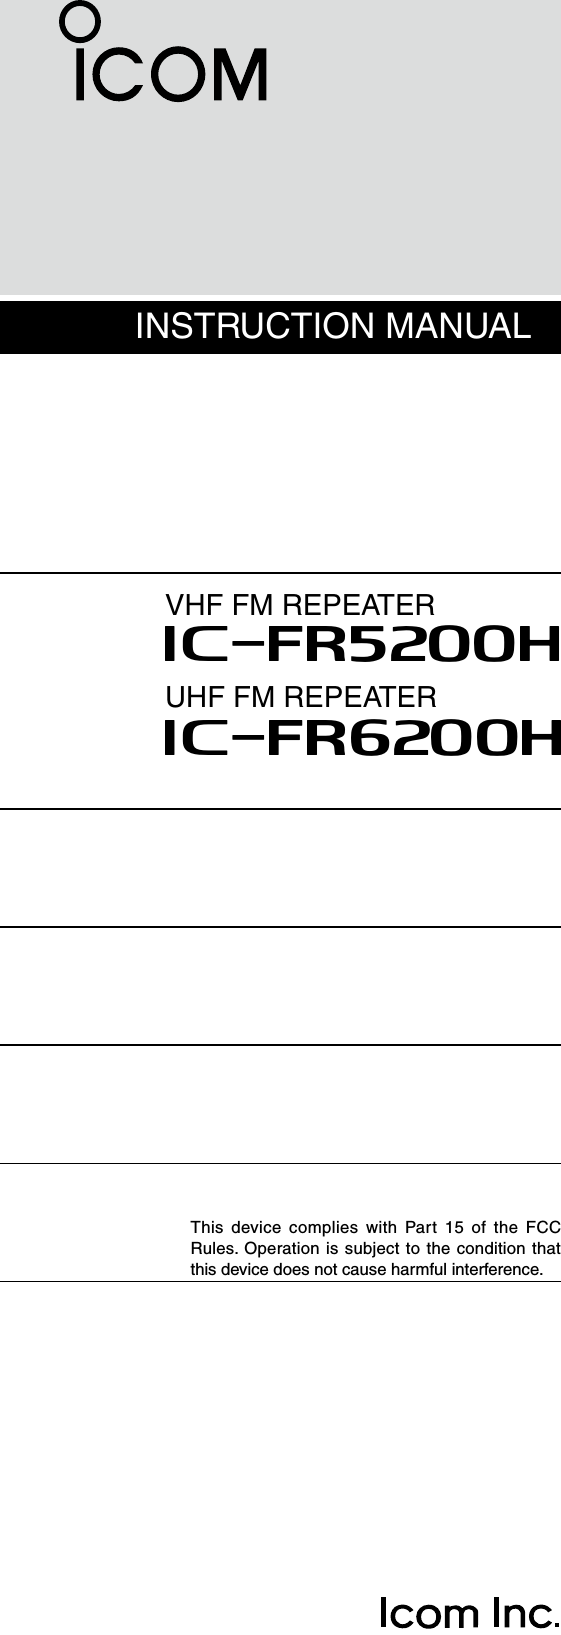 INSTRUCTION MANUALVHF FM REPEATERiFR5200HiFR6200HUHF FM REPEATERThis  device complies with Part  15  of  the  FCC Rules. Operation is subject to the condition that this device does not cause harmful interference.